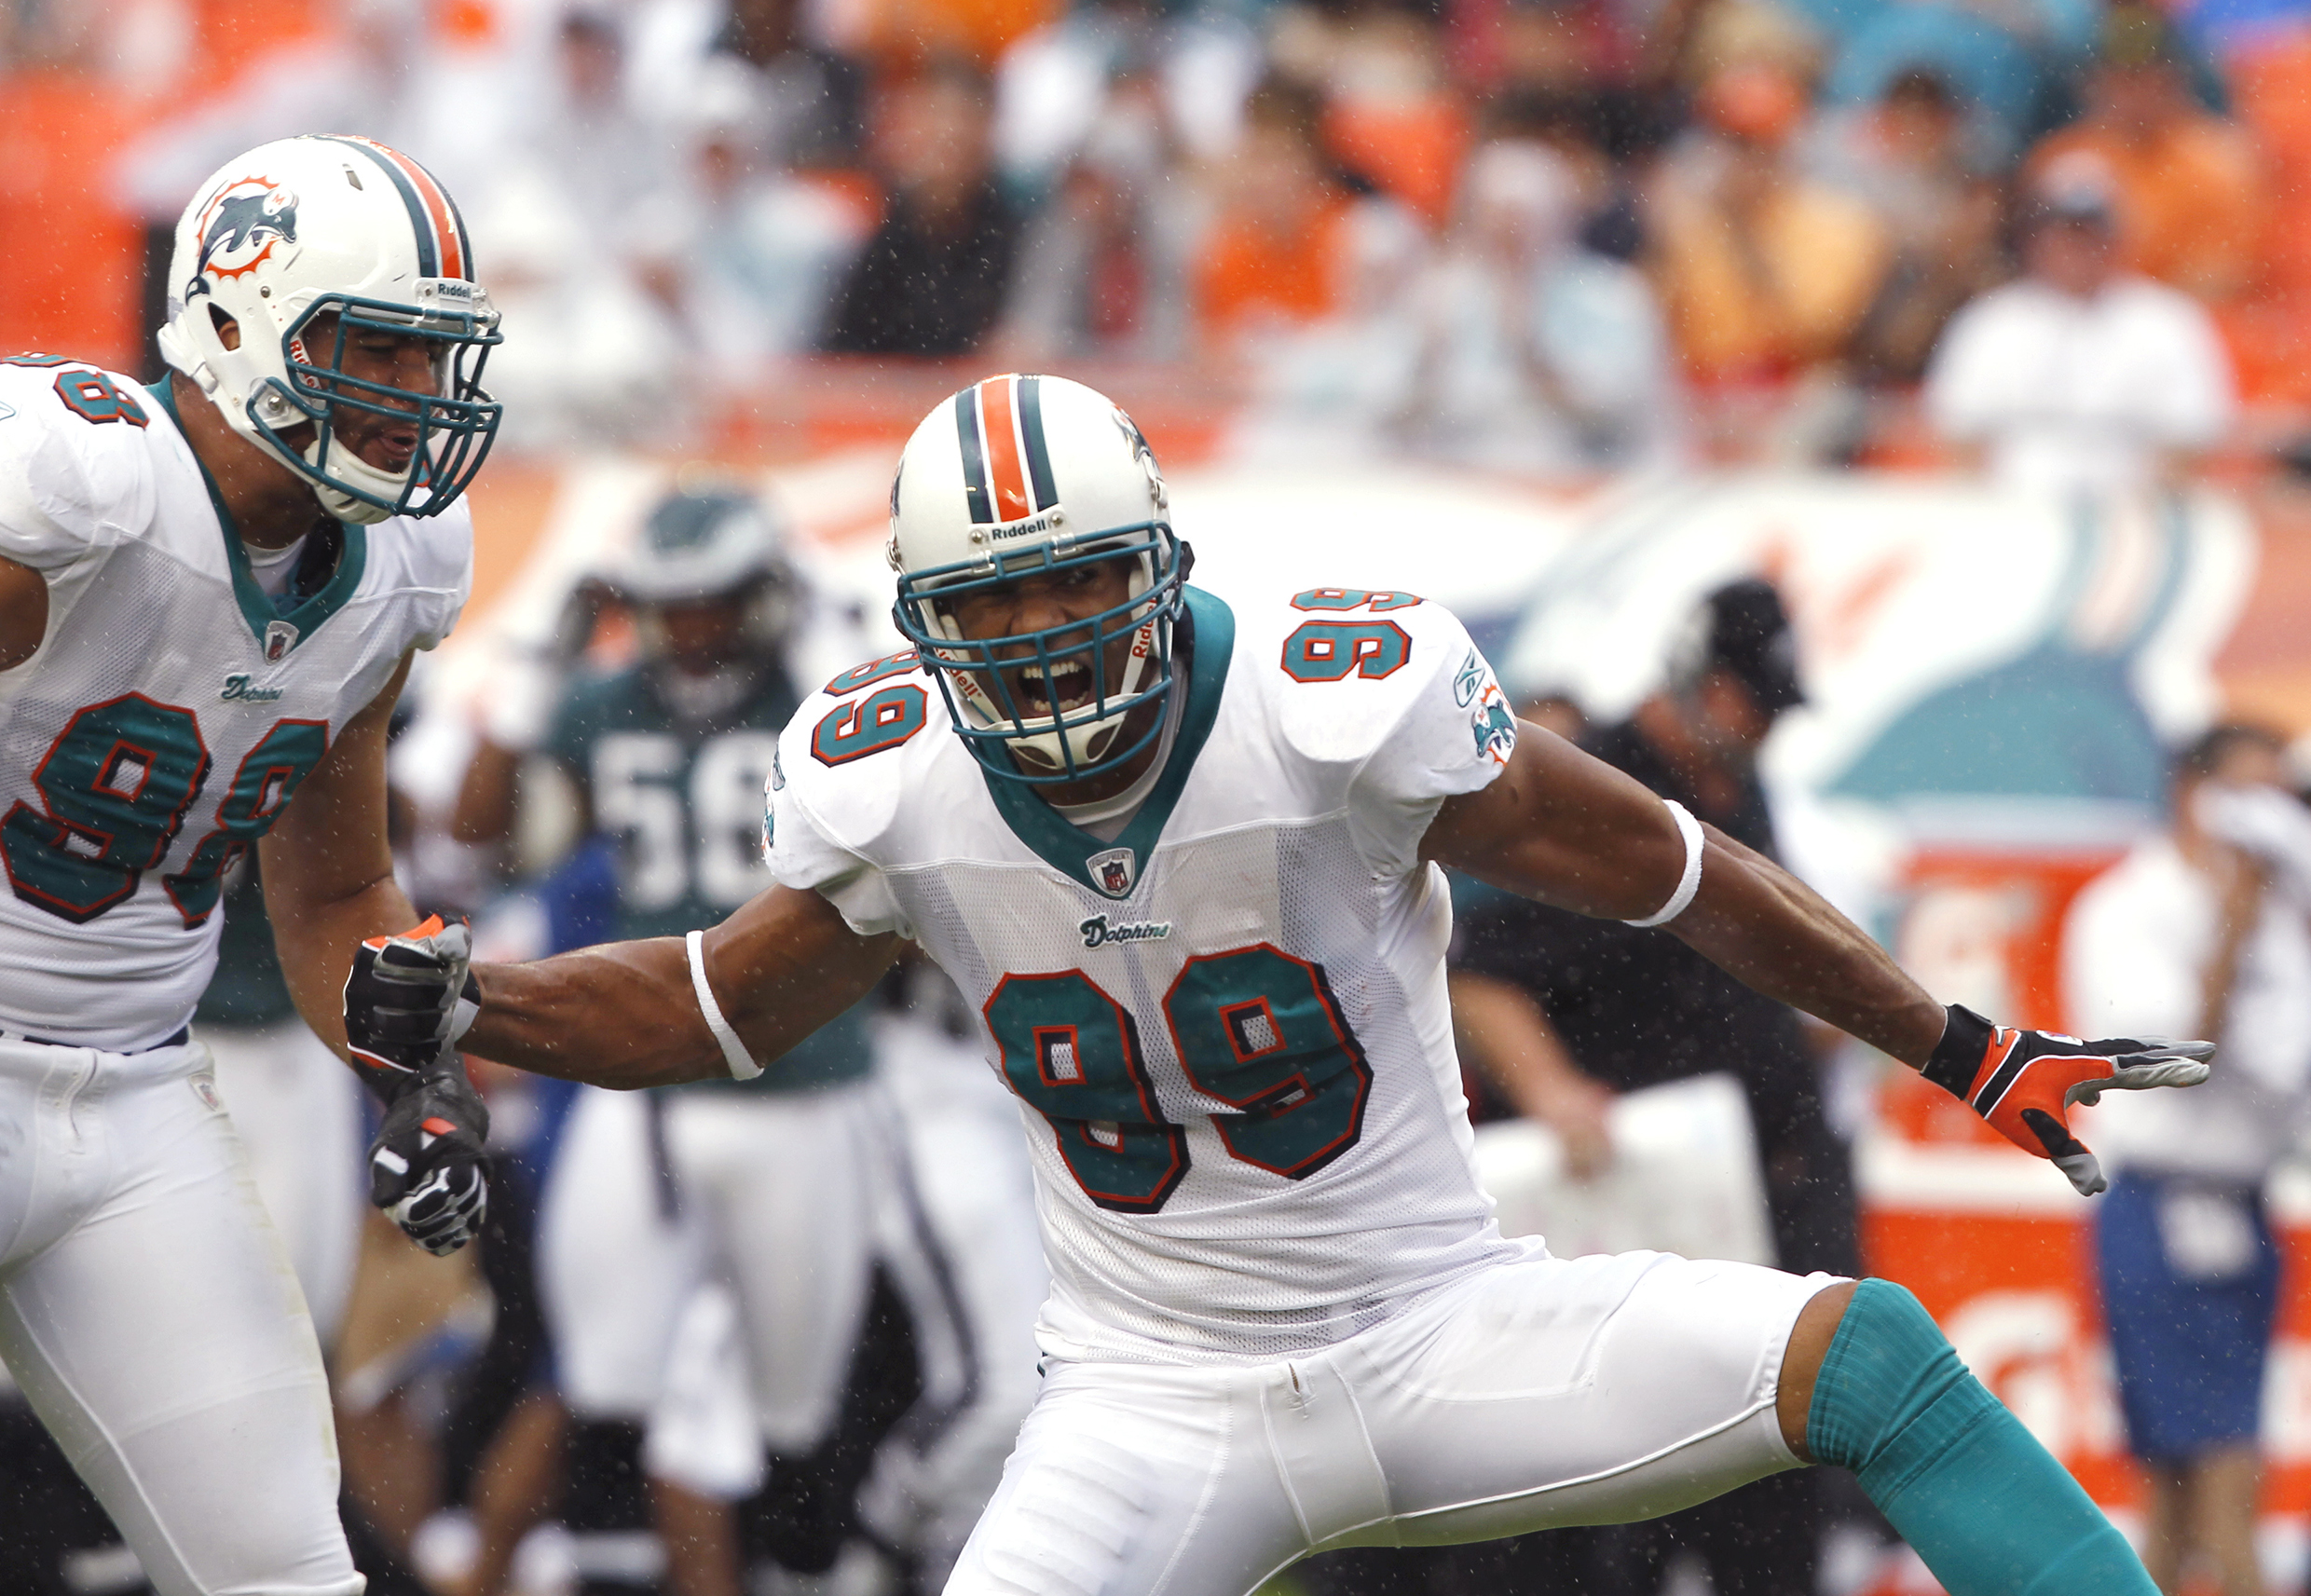 Jason Taylor spent much of his Pro Football Hall of Fame career playing for the Miami Dolphins and he remains close with the organization.